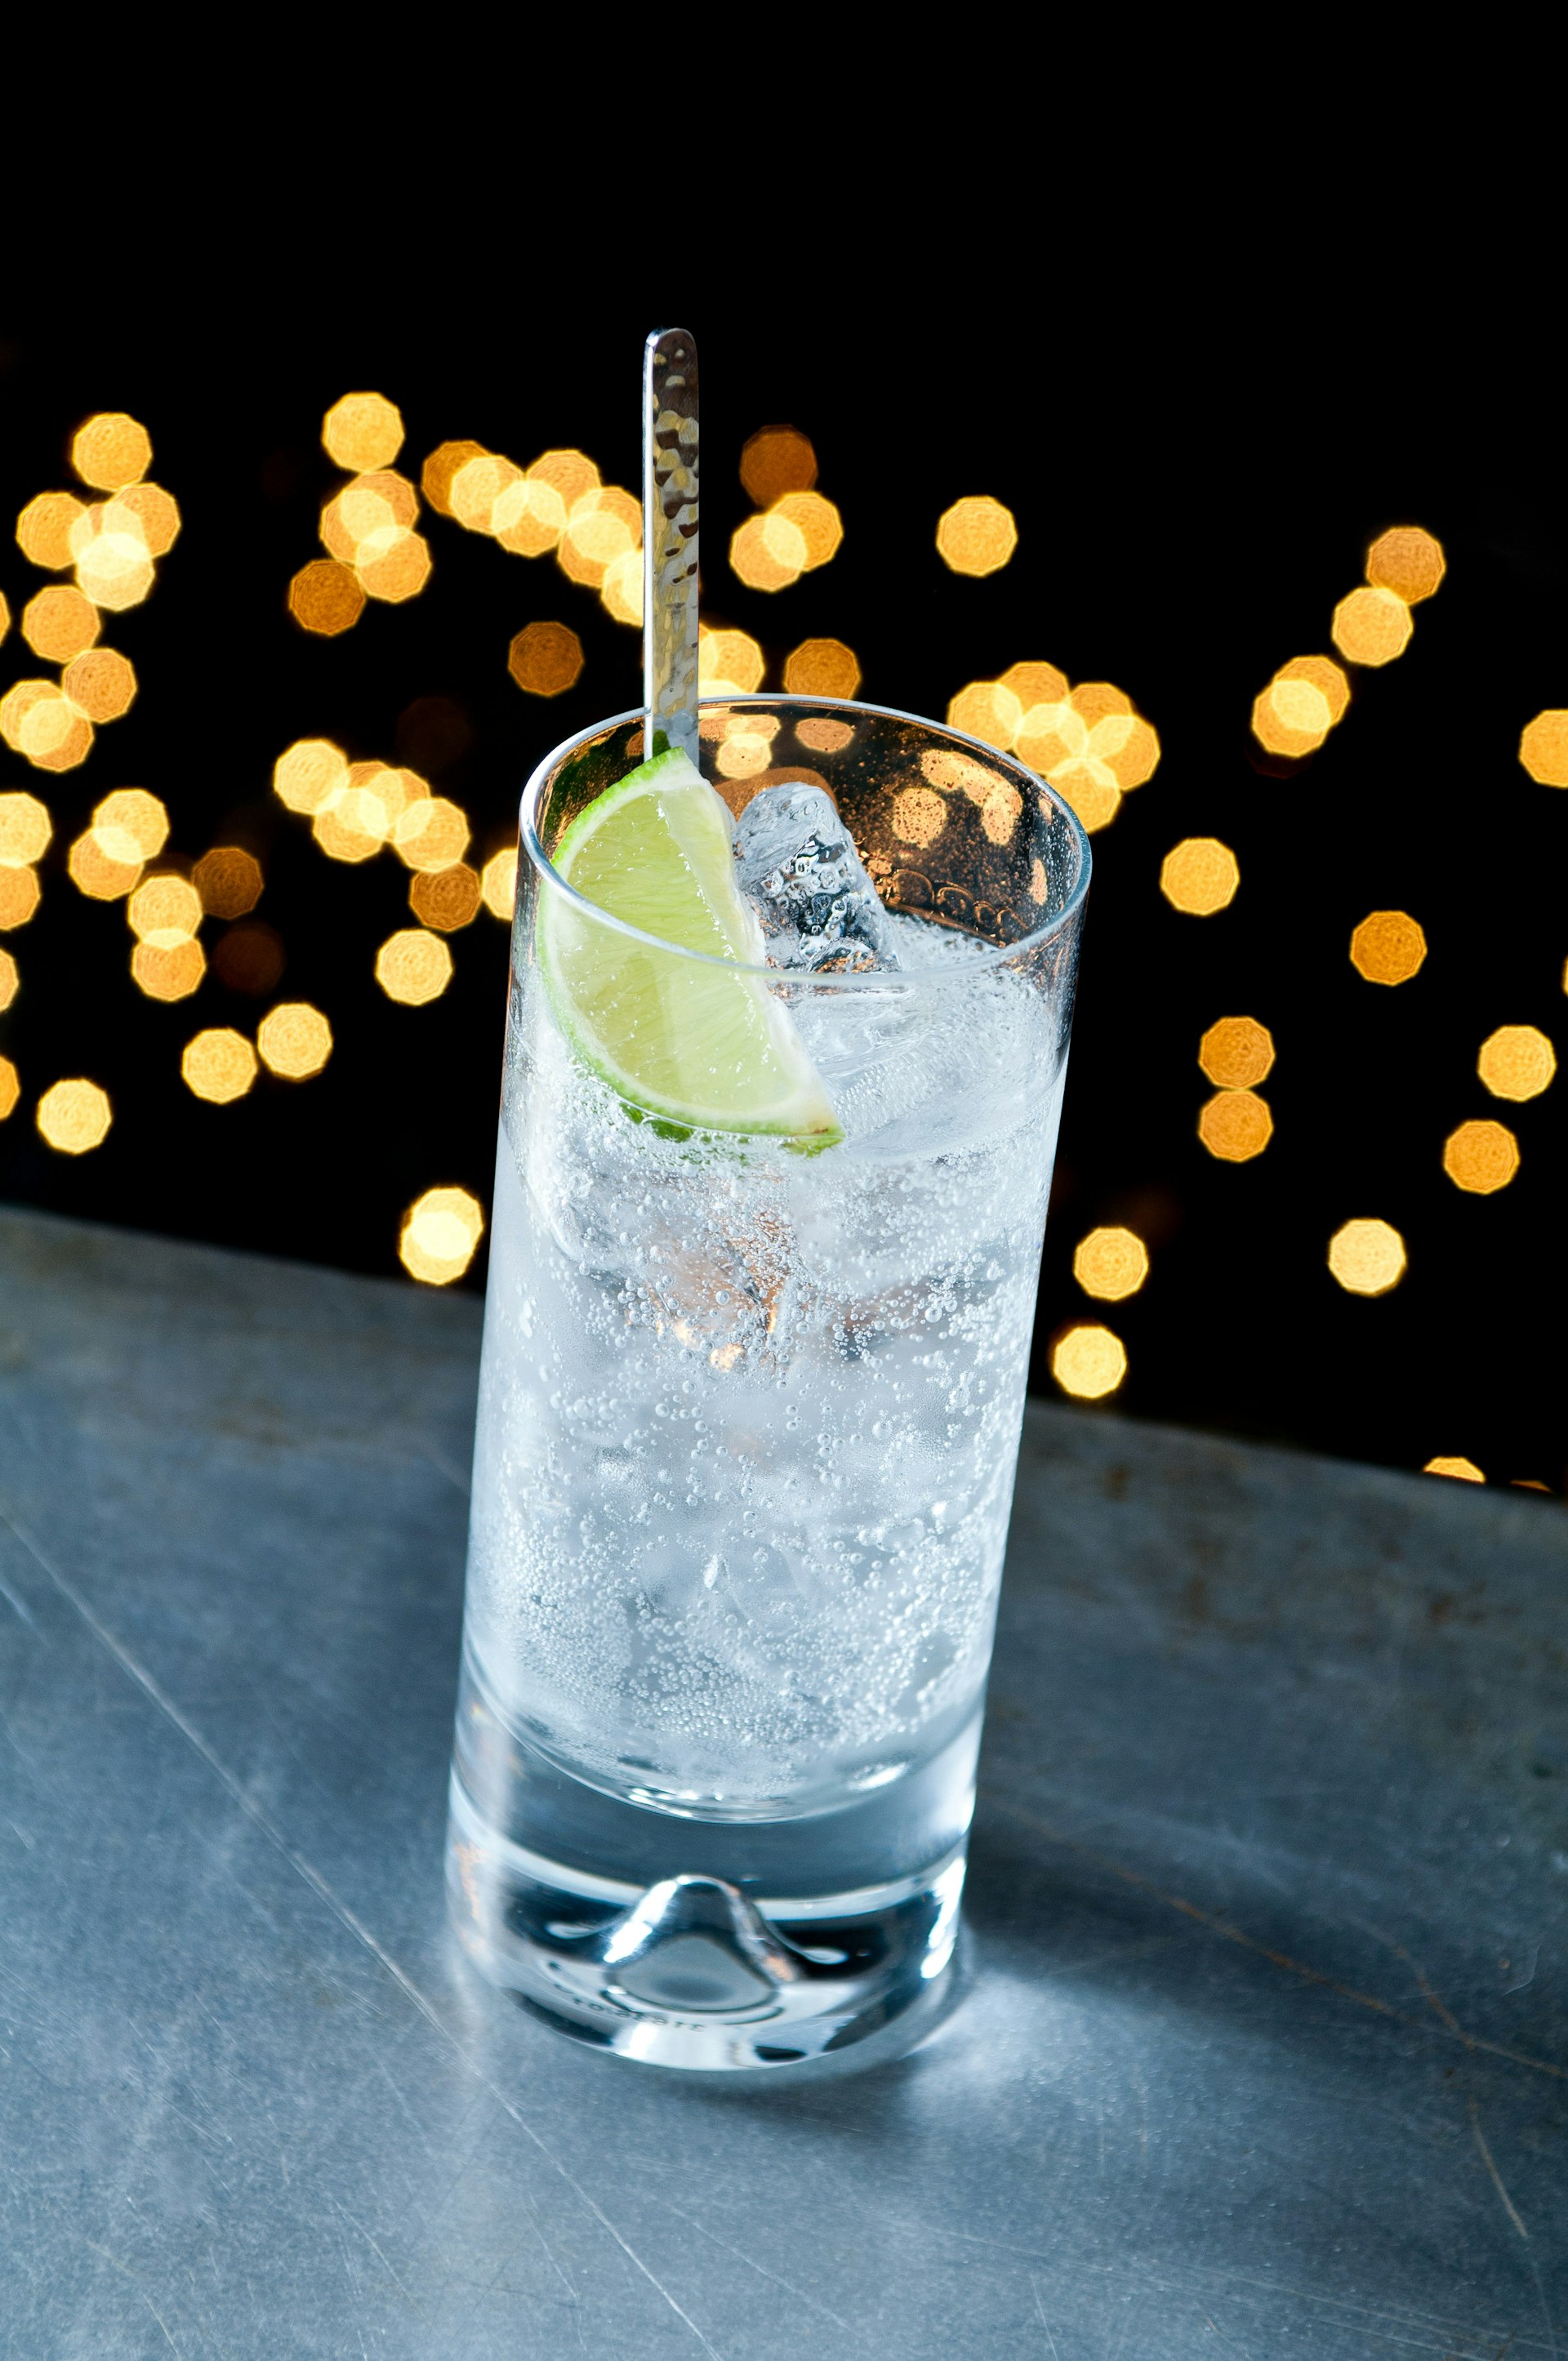 A gin and tonic is just one in a slew of cocktails featured at Apotecario © Getty Images 